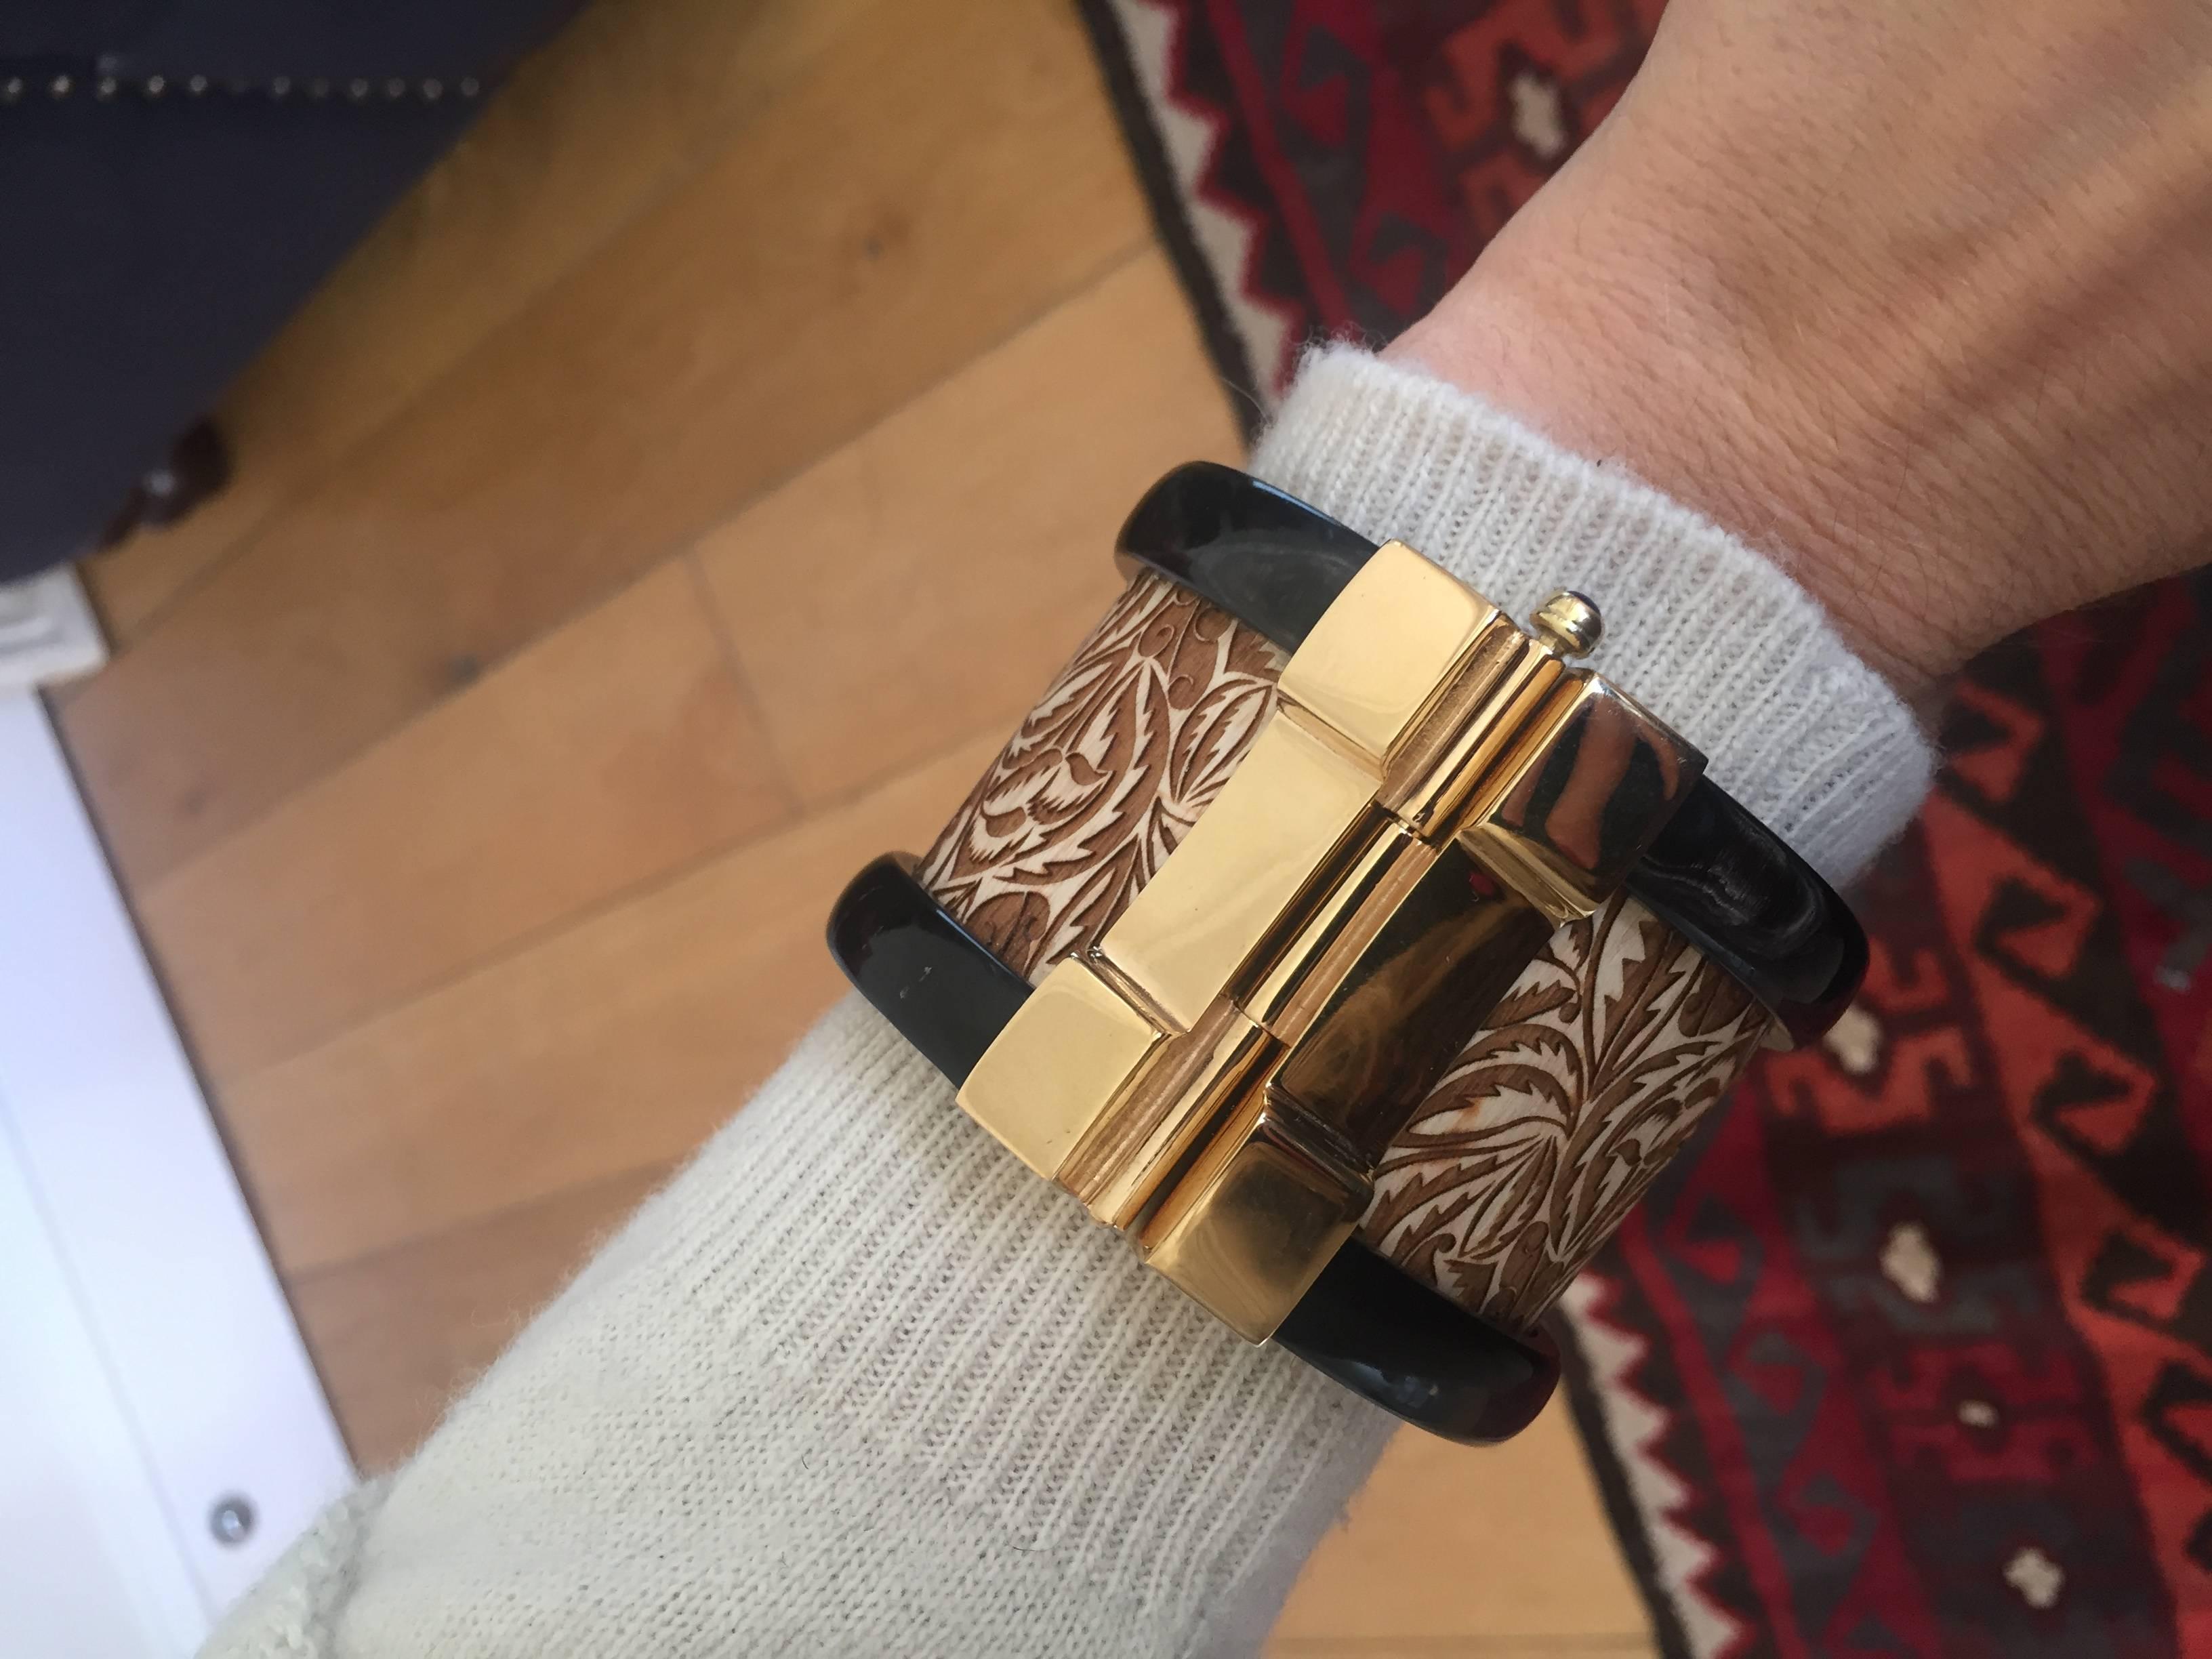 This bespoke cuff bracelet is crafted from engraved jacaranda wood and African cow horn. The intricate 18k gold plated pin-clasp is set with a blue sapphire. Inspired by warrior style cuffs worn by former Vogue editor Diana Vreeland. 

Each cuff is